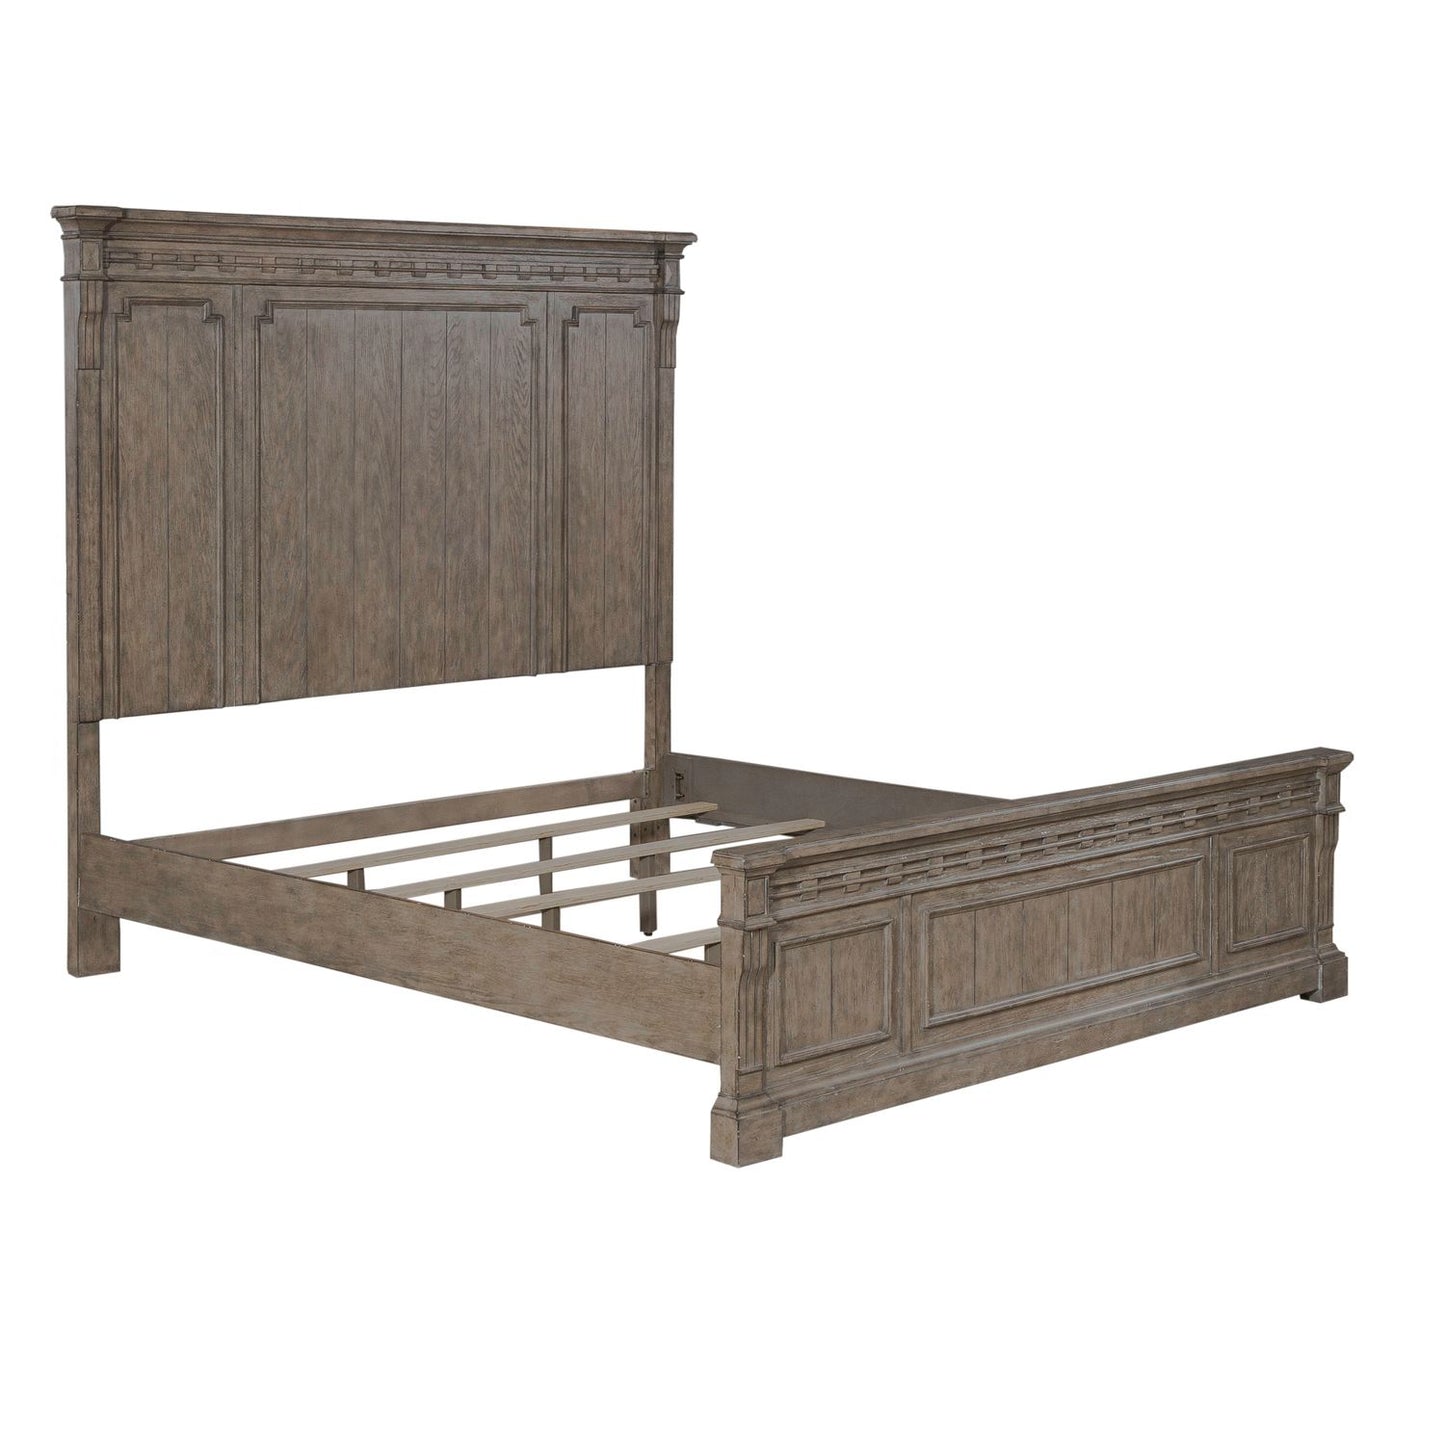 Town & Country - King Panel Bed